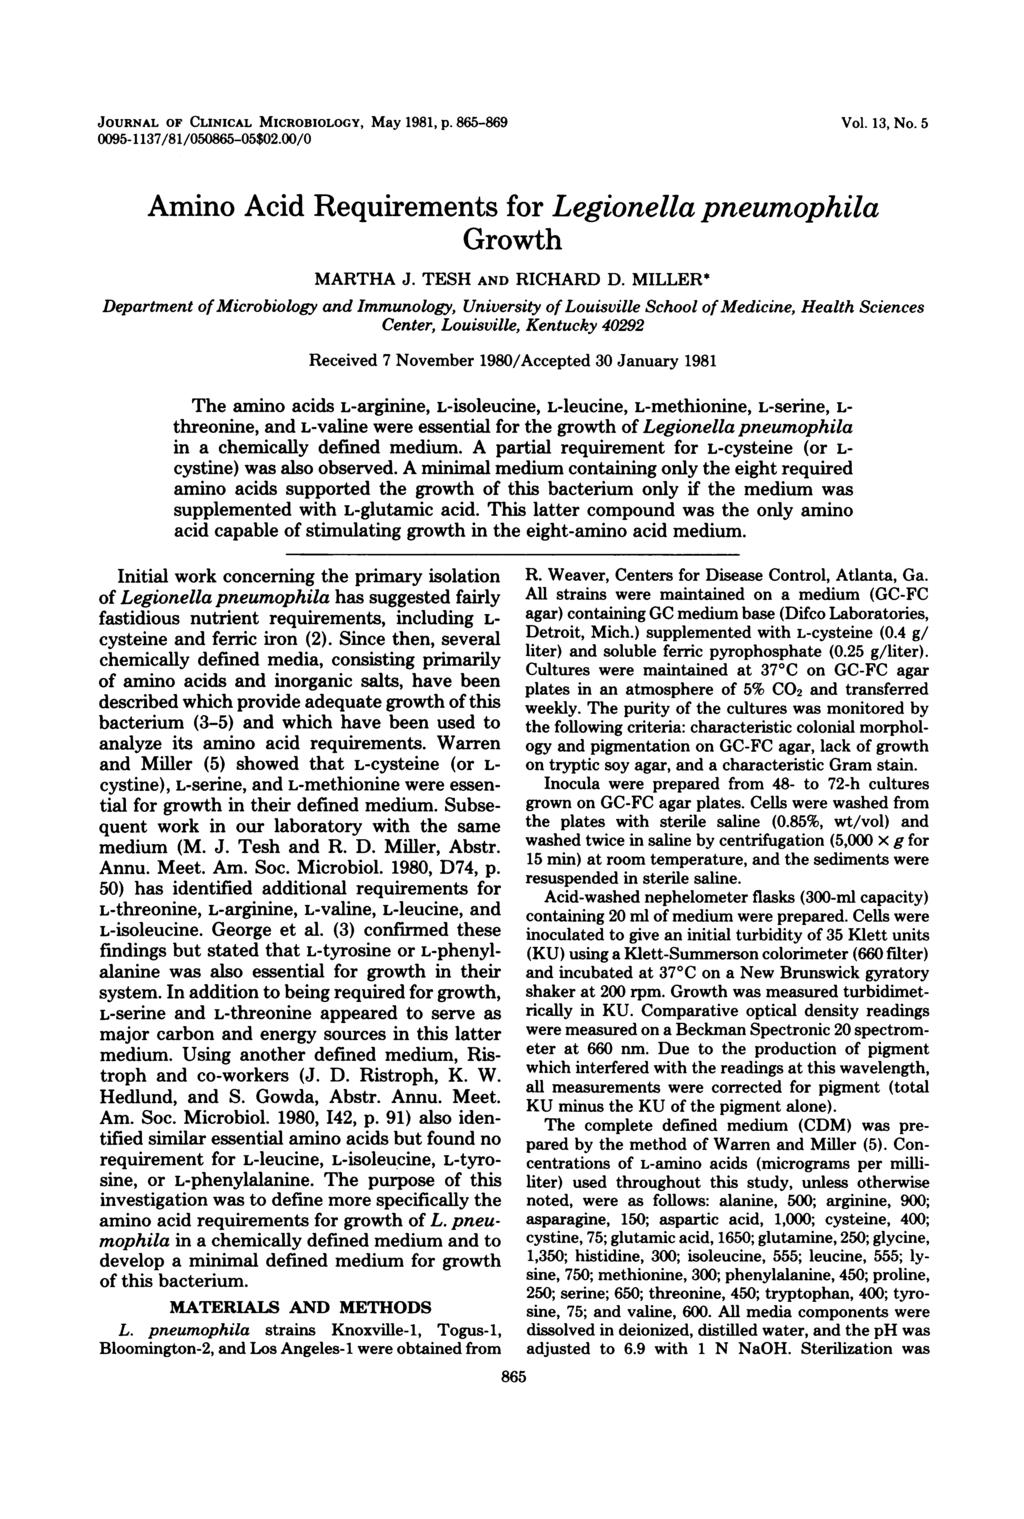 JOURNAL OF CLINICAL MICROBIOLOGY, May 1981, p. 865-869 0095-1137/81/050865-05$02.00/0 Vol. 13, No. 5 Amino Acid Requirements for Legionella pneumophila Growth MARTHA J. TESH AND RICHARD D.